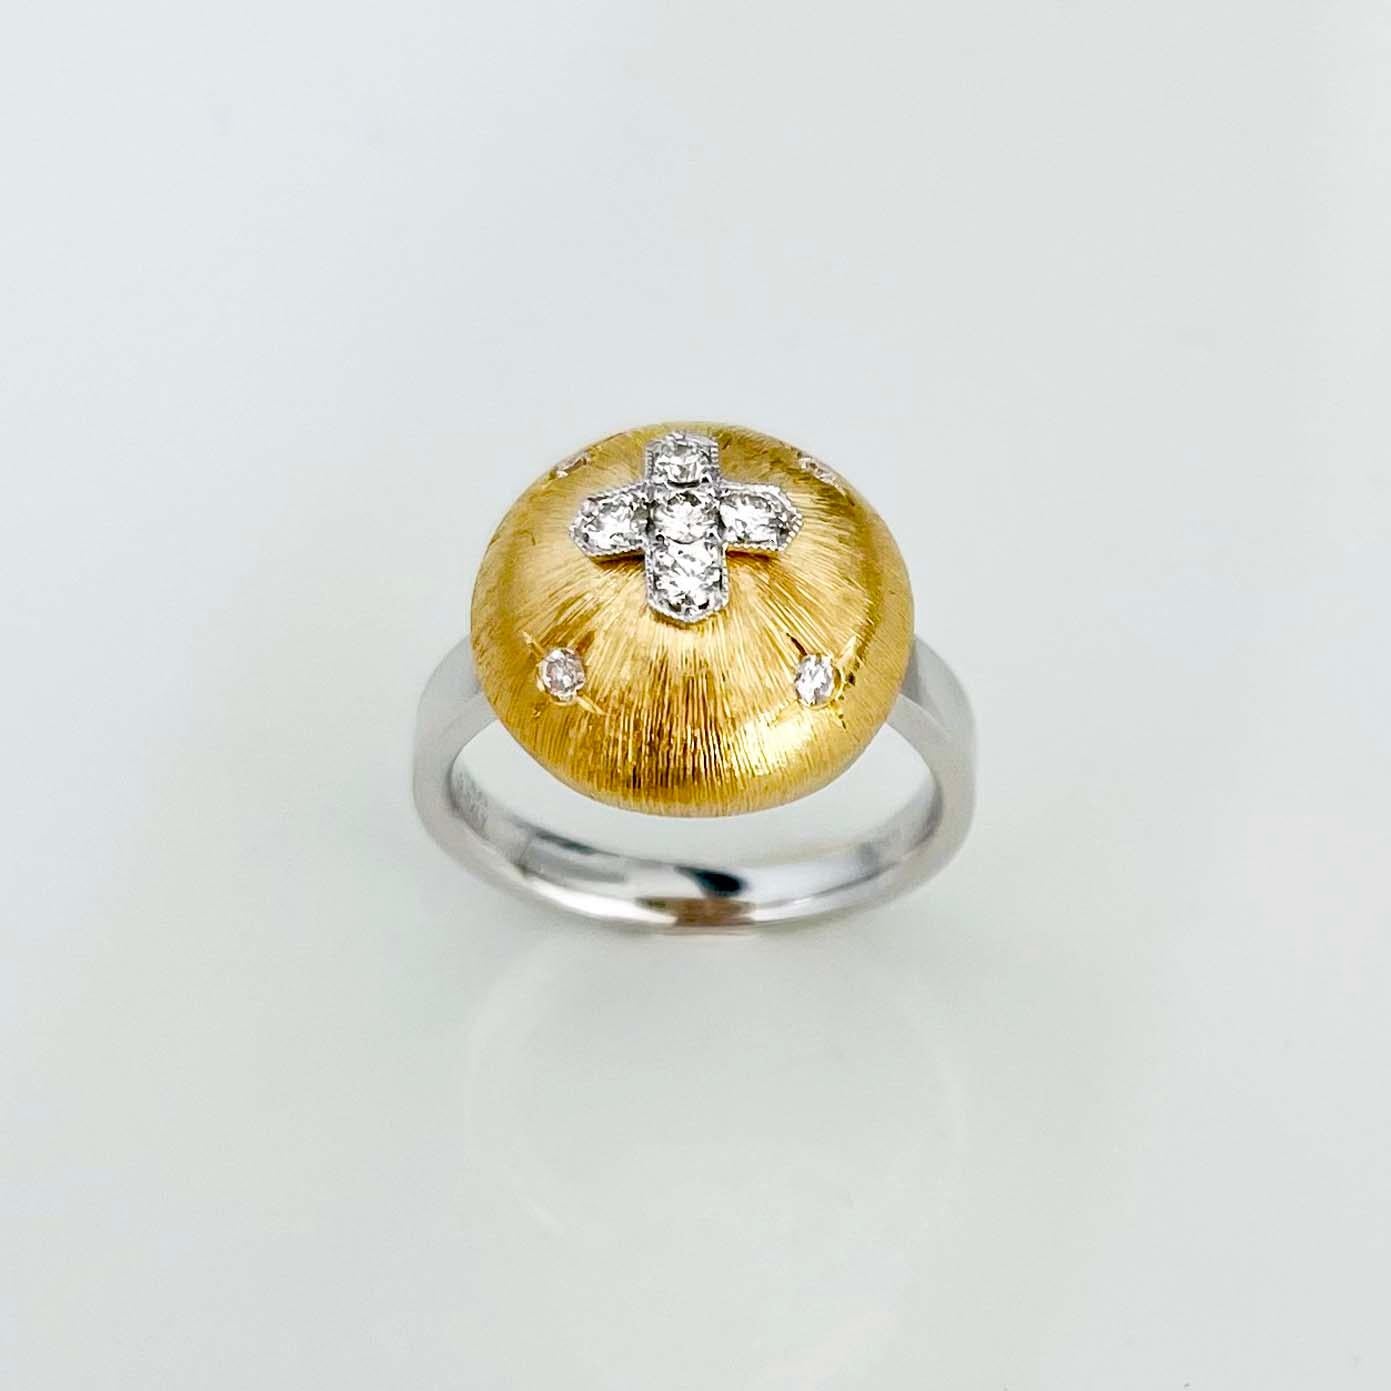 Florentine Finished Two-Tone 18 Karat Gold Italian Diamond Ring In New Condition For Sale In Los Angeles, CA